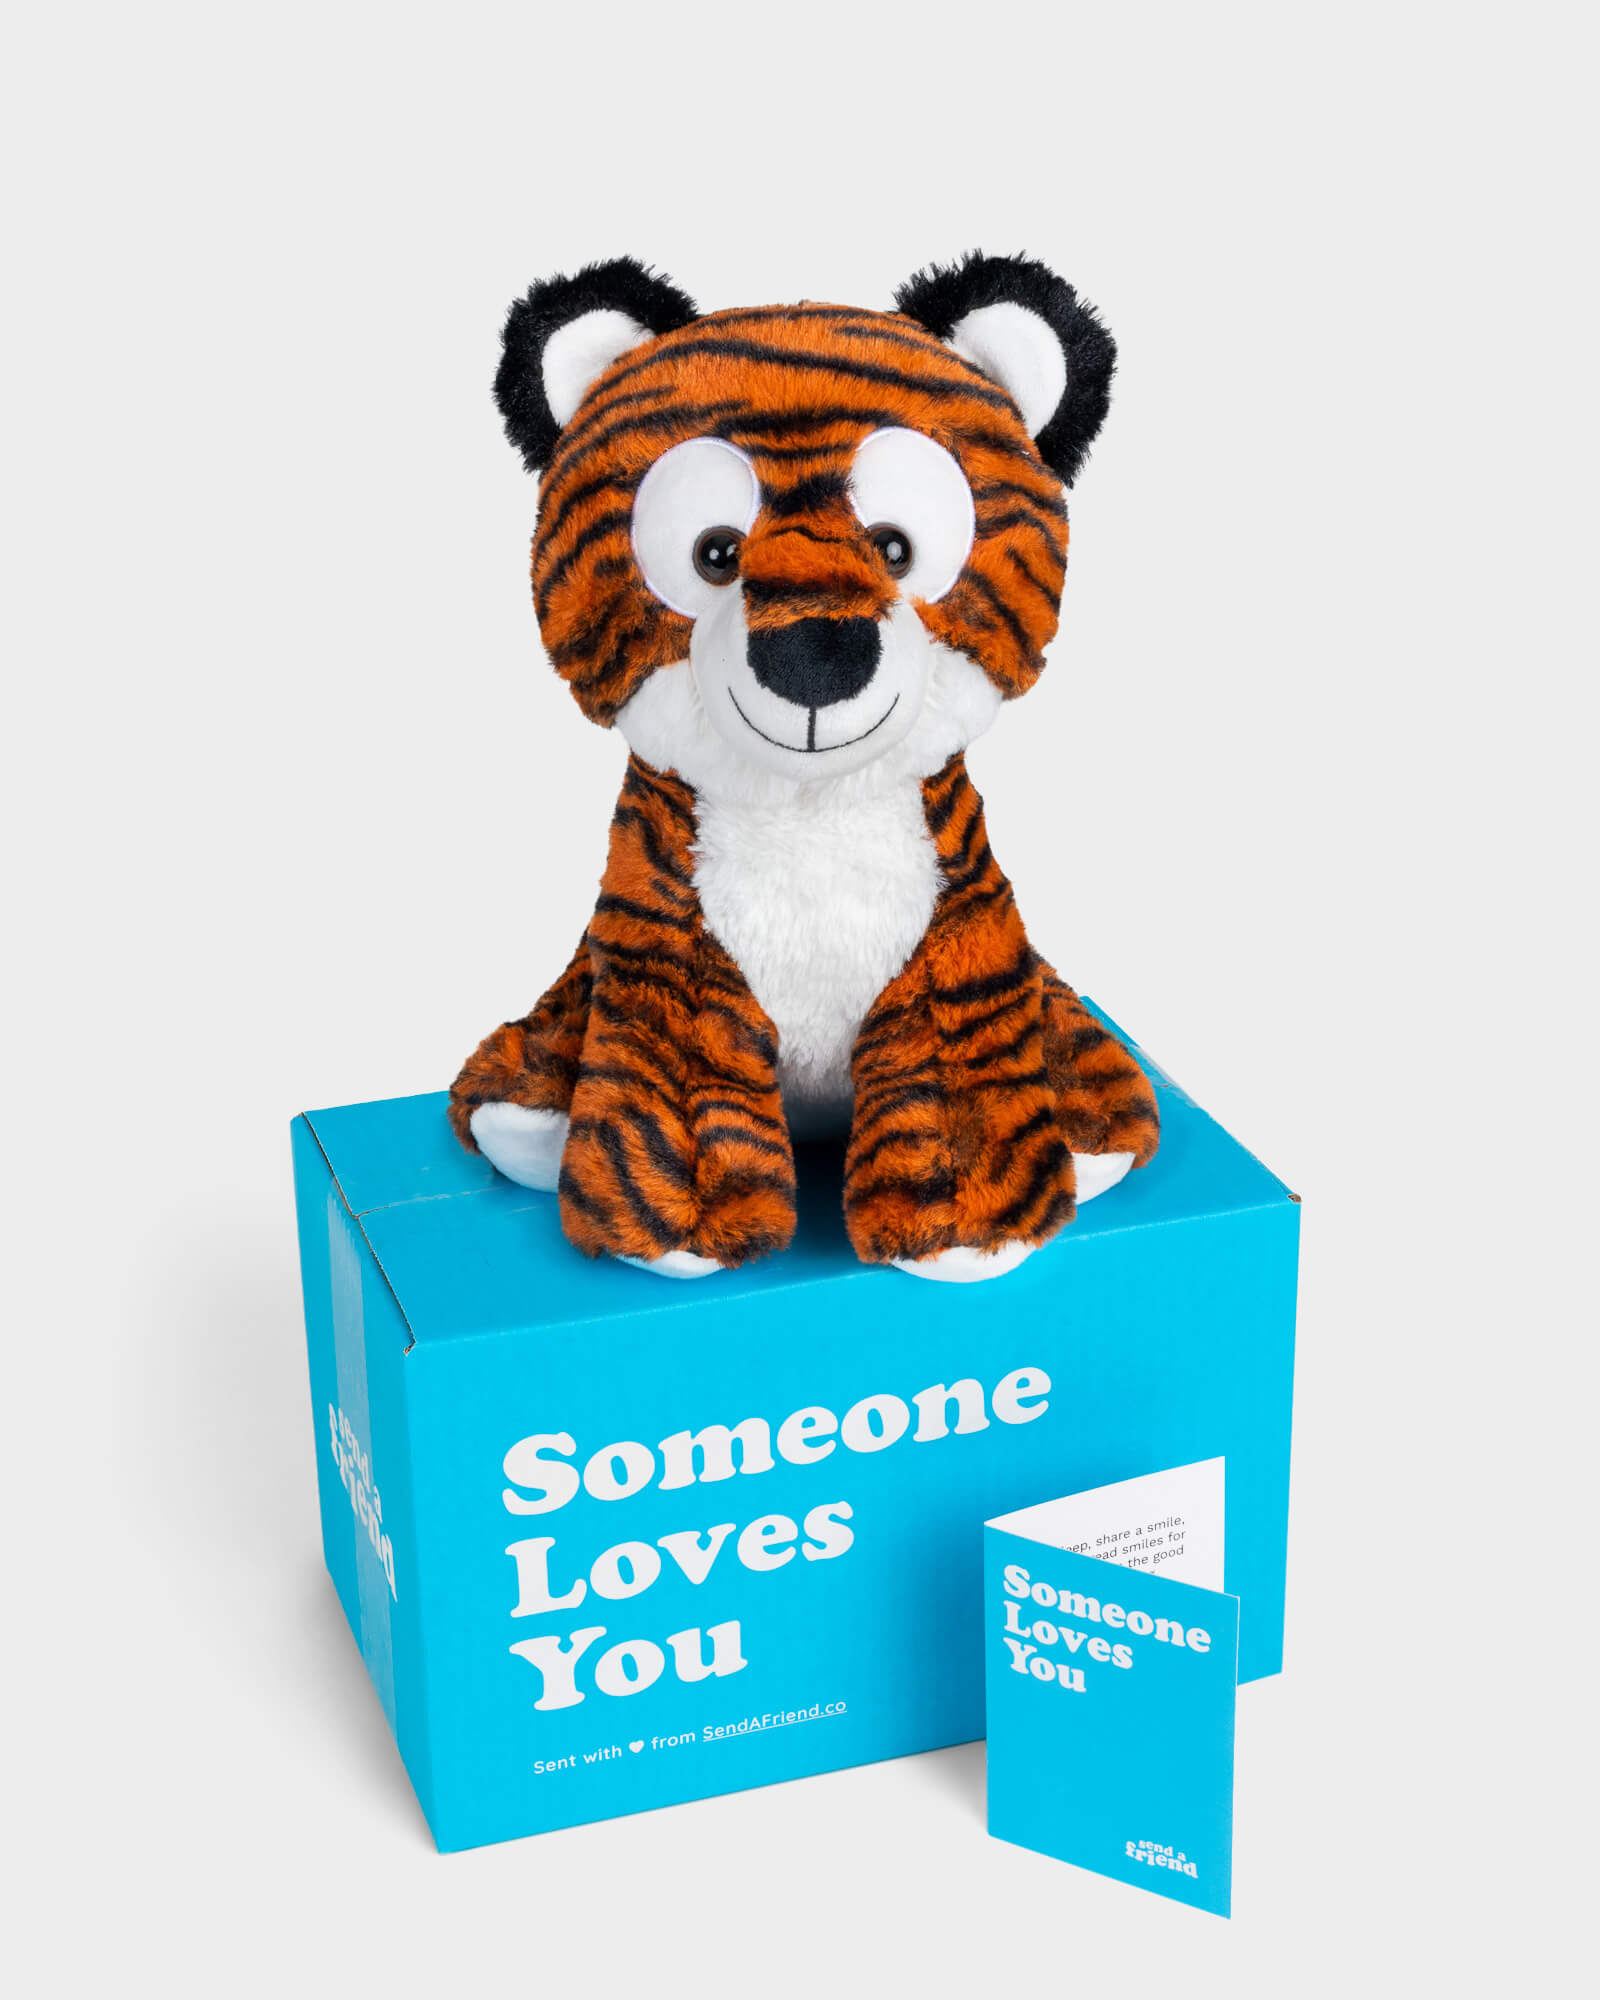 Orange and black striped tiger plushie sitting on top of SendAFriend box and next to notecard both in signature blue color